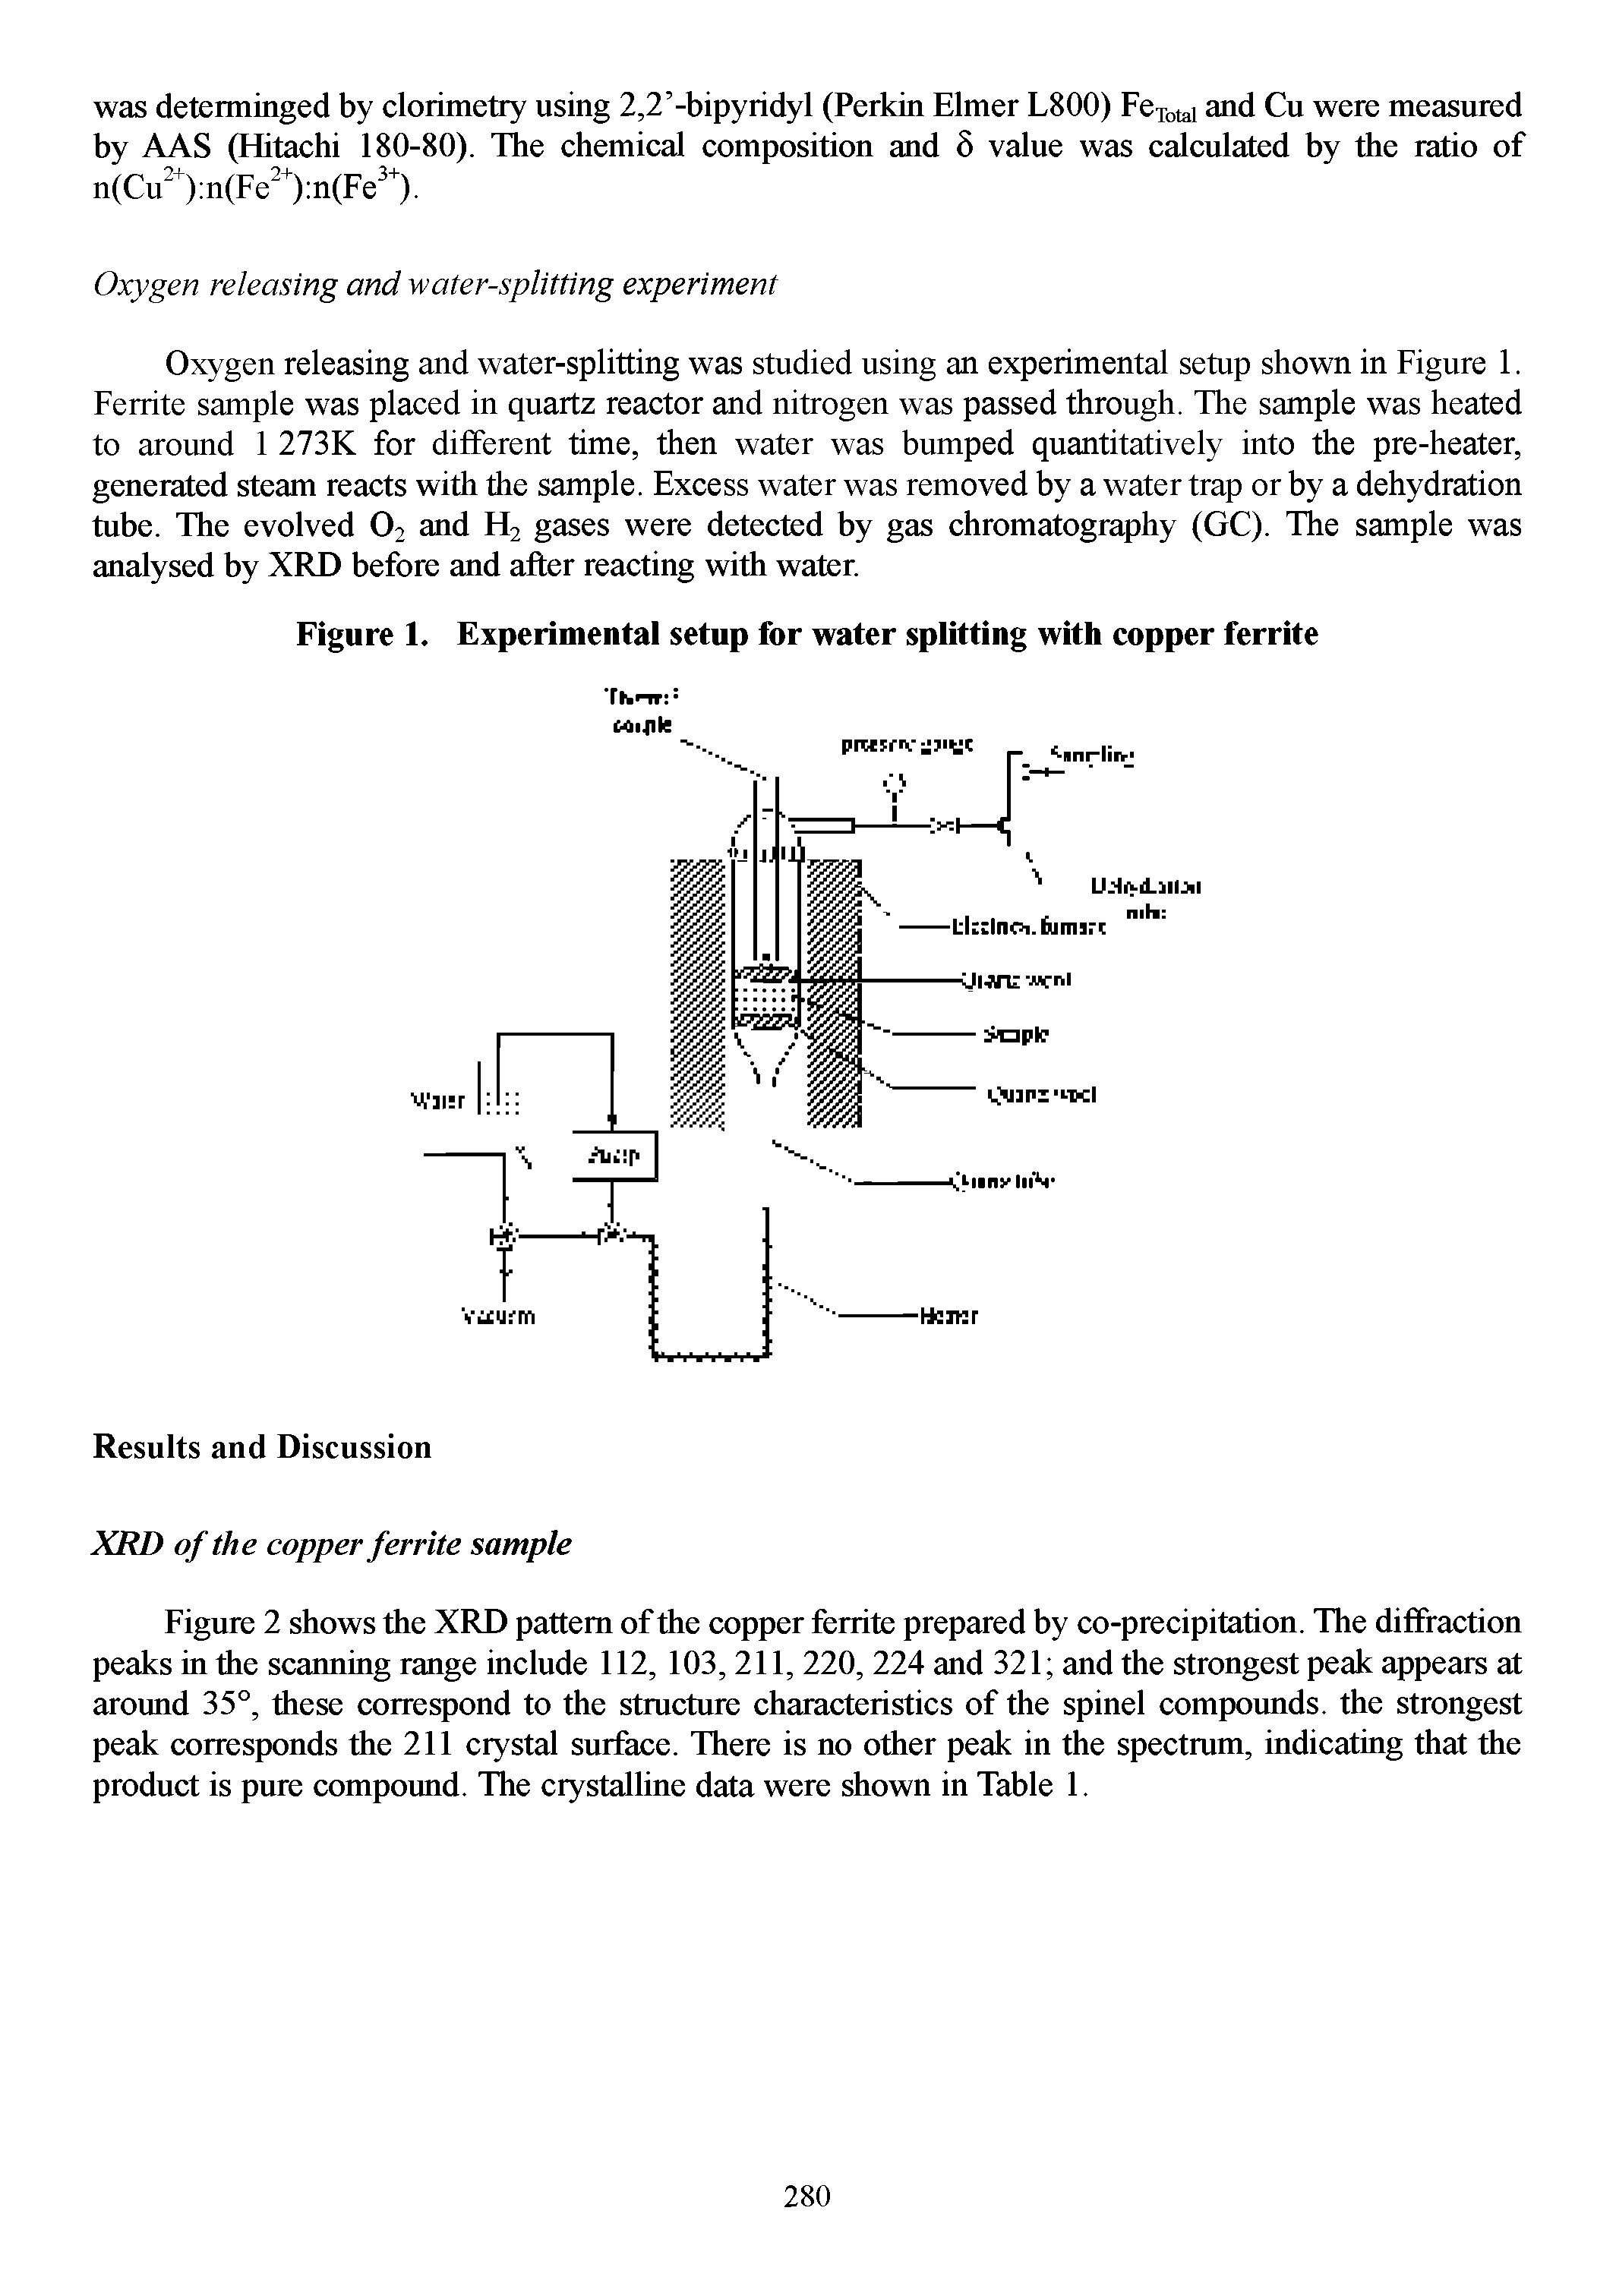 Figure 1. Experimental setup for water splitting with copper ferrite...